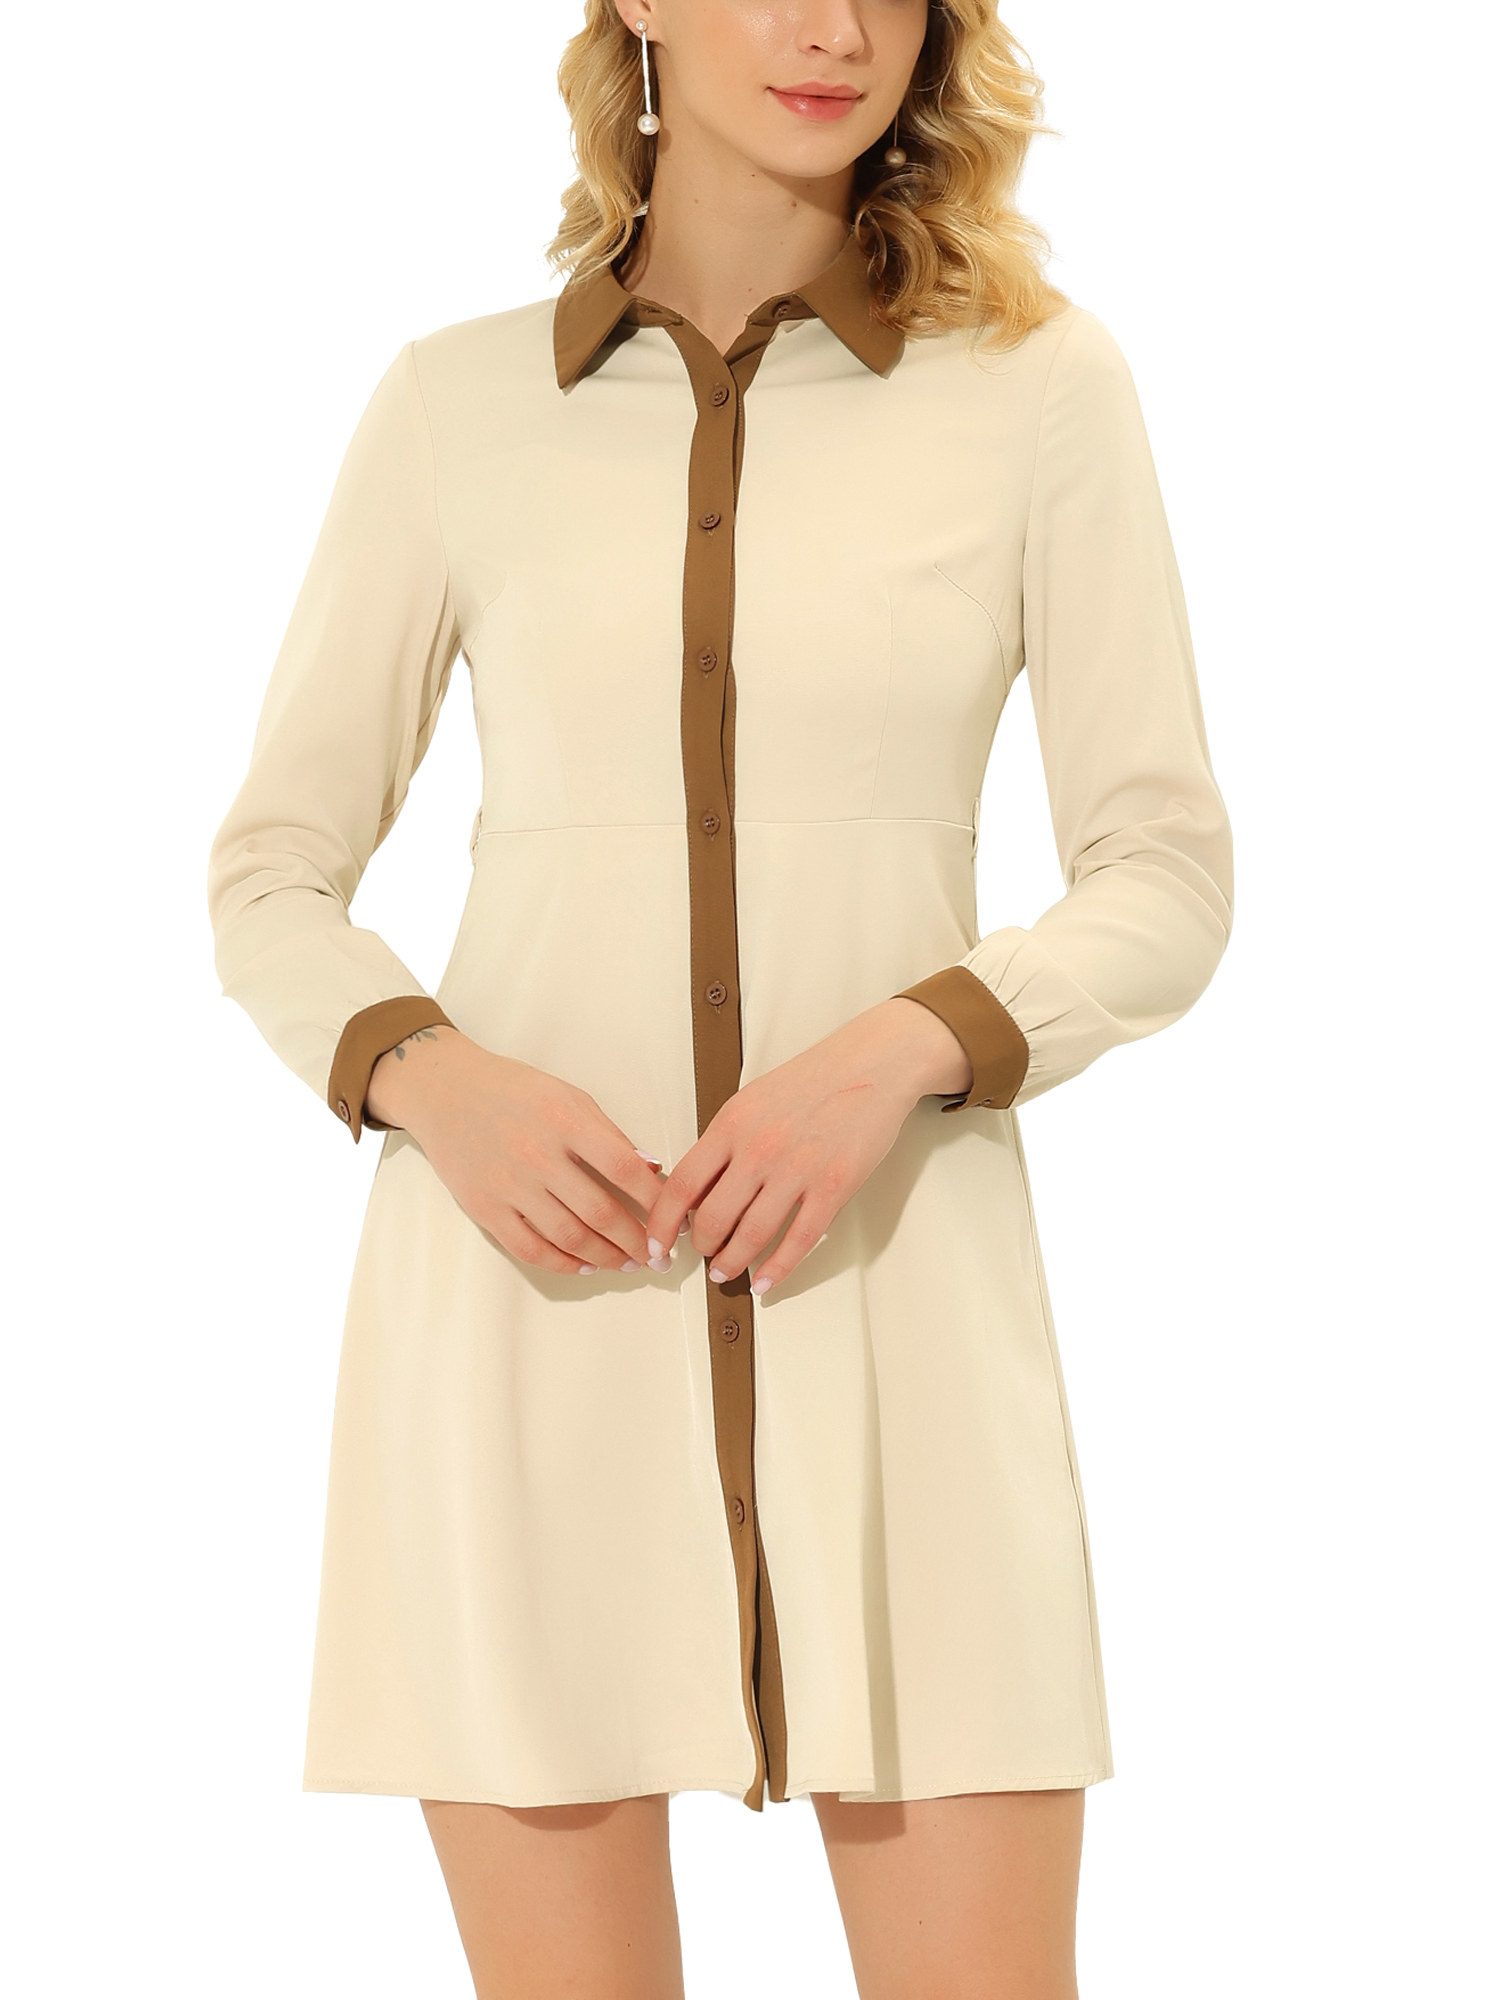 a model wearing the beige and tan long sleeve dress